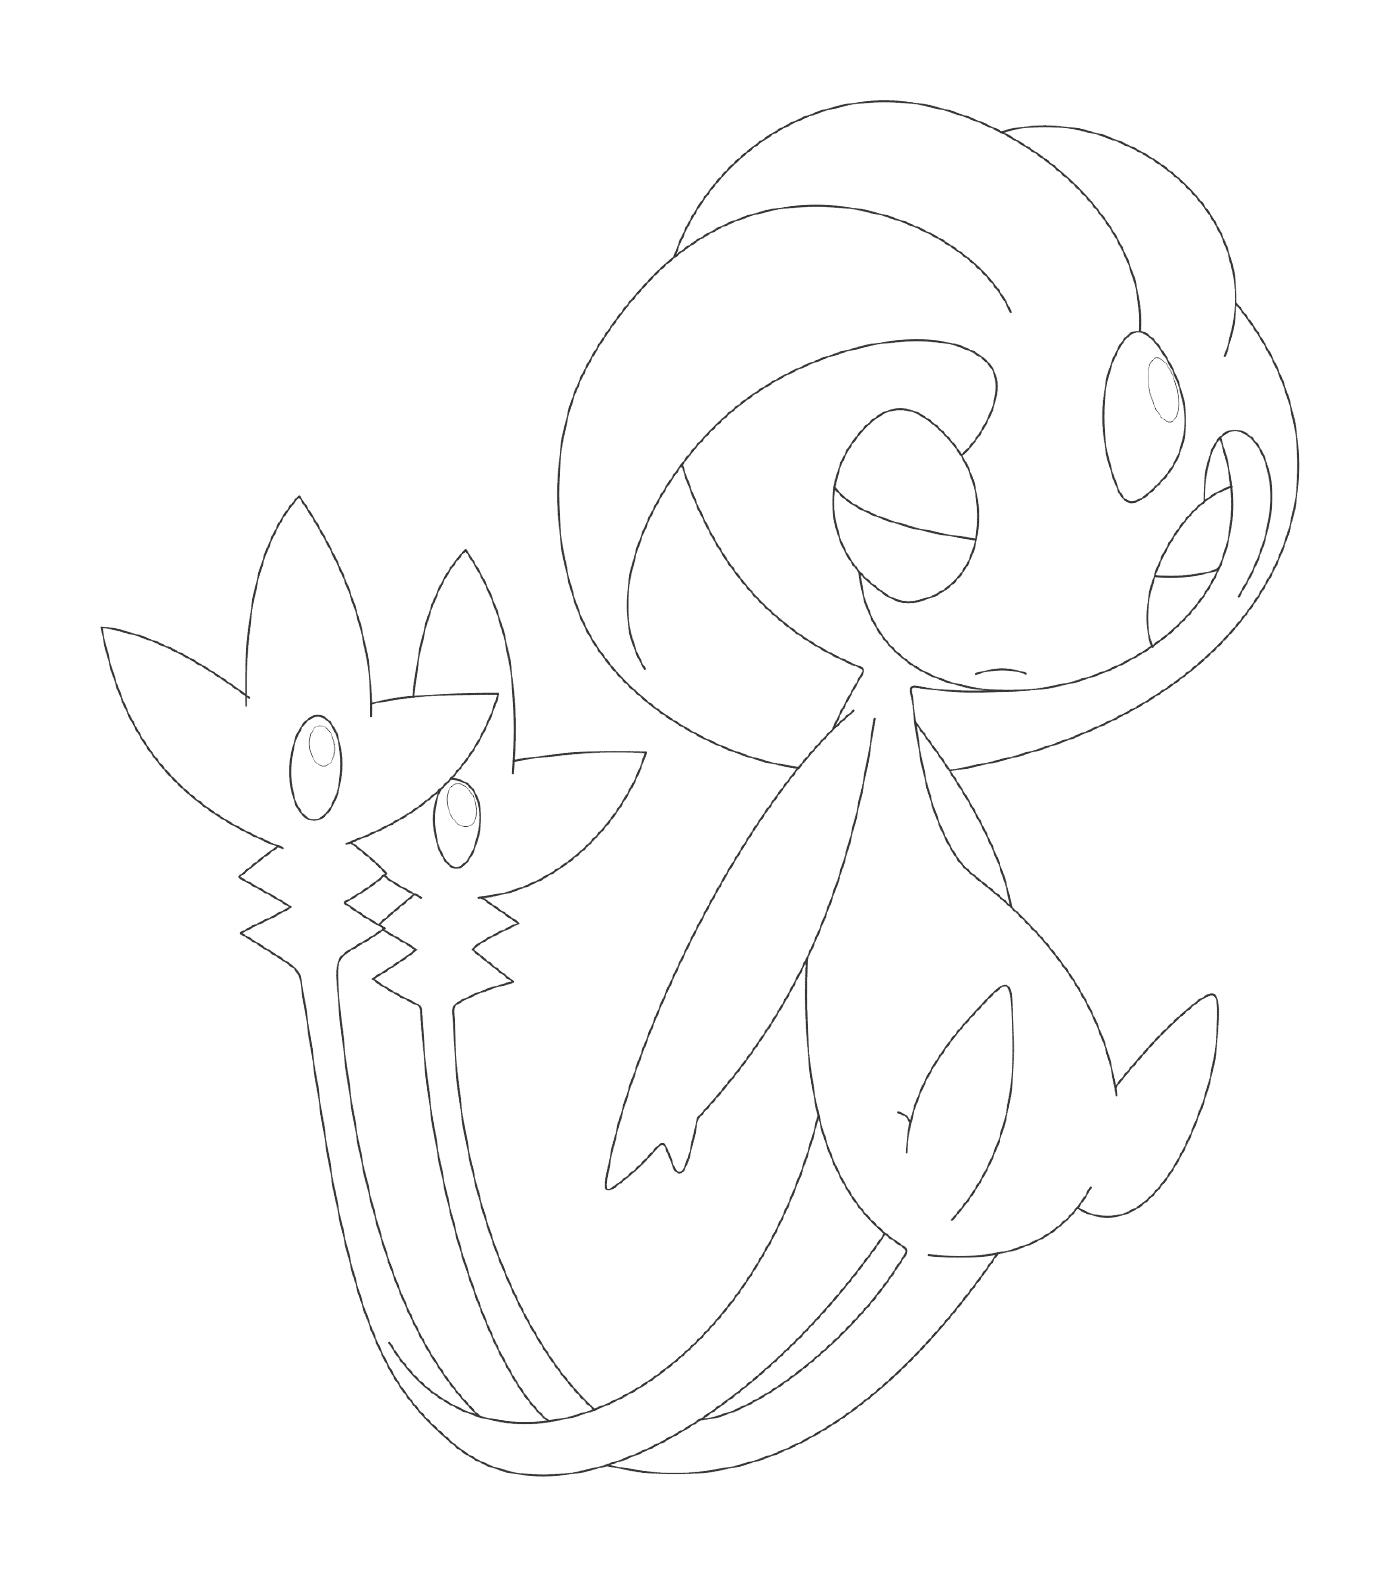  Uxie Pokémon mysterious drawing 